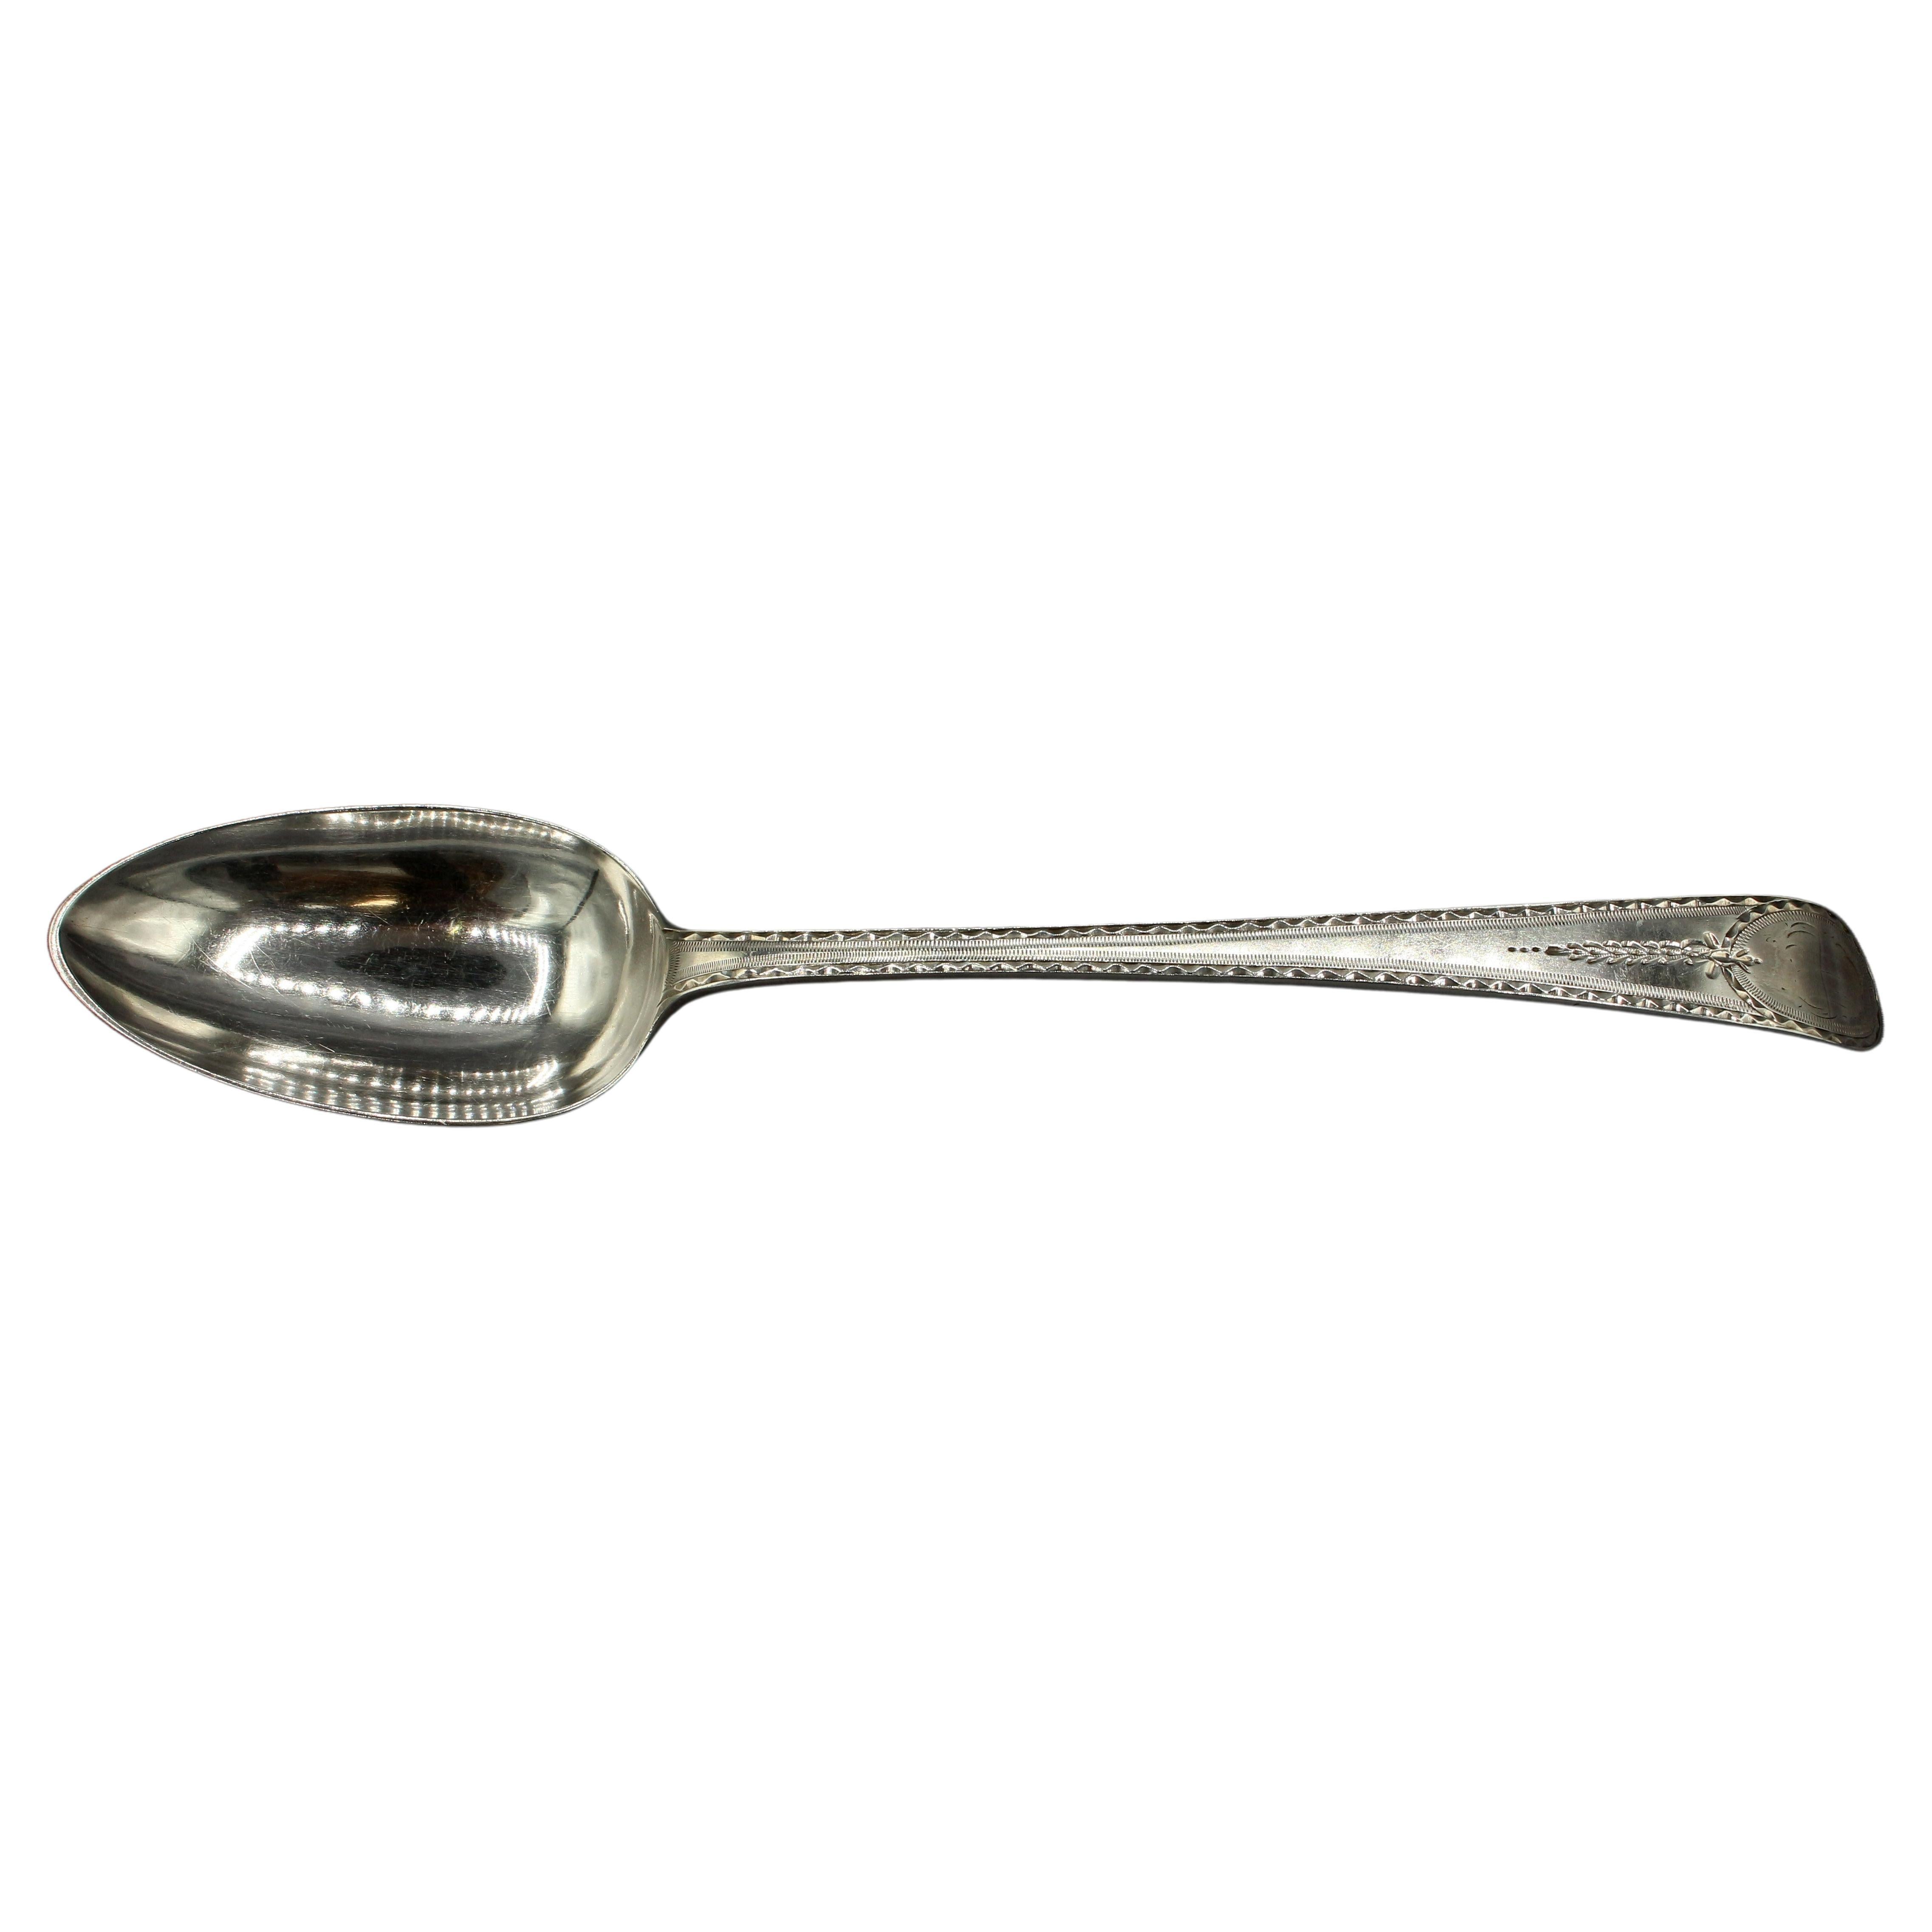 1782 George III Period Sterling Silver Tablespoon by Hester Bateman For Sale